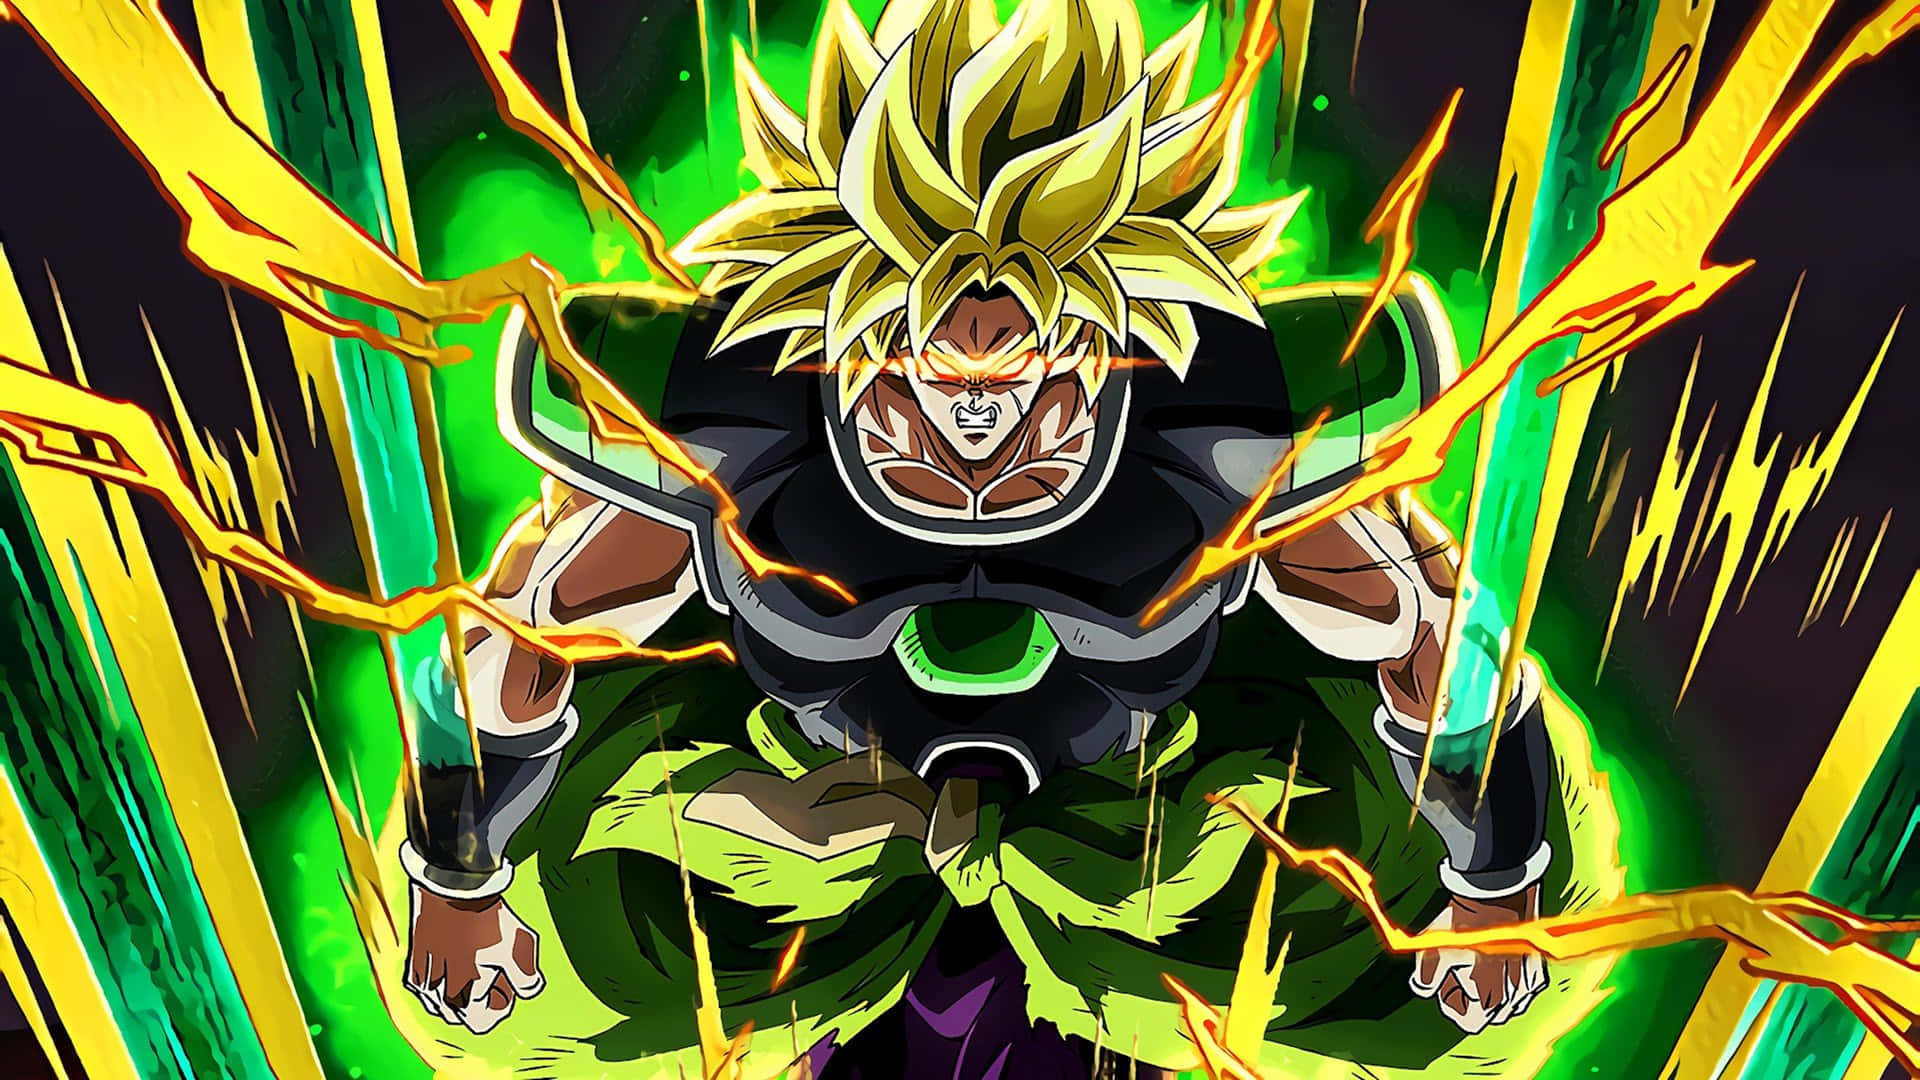 Take on The Legendary Super Saiyan, Broly, in this Ultra High-Definition 4K Wallpaper. Wallpaper